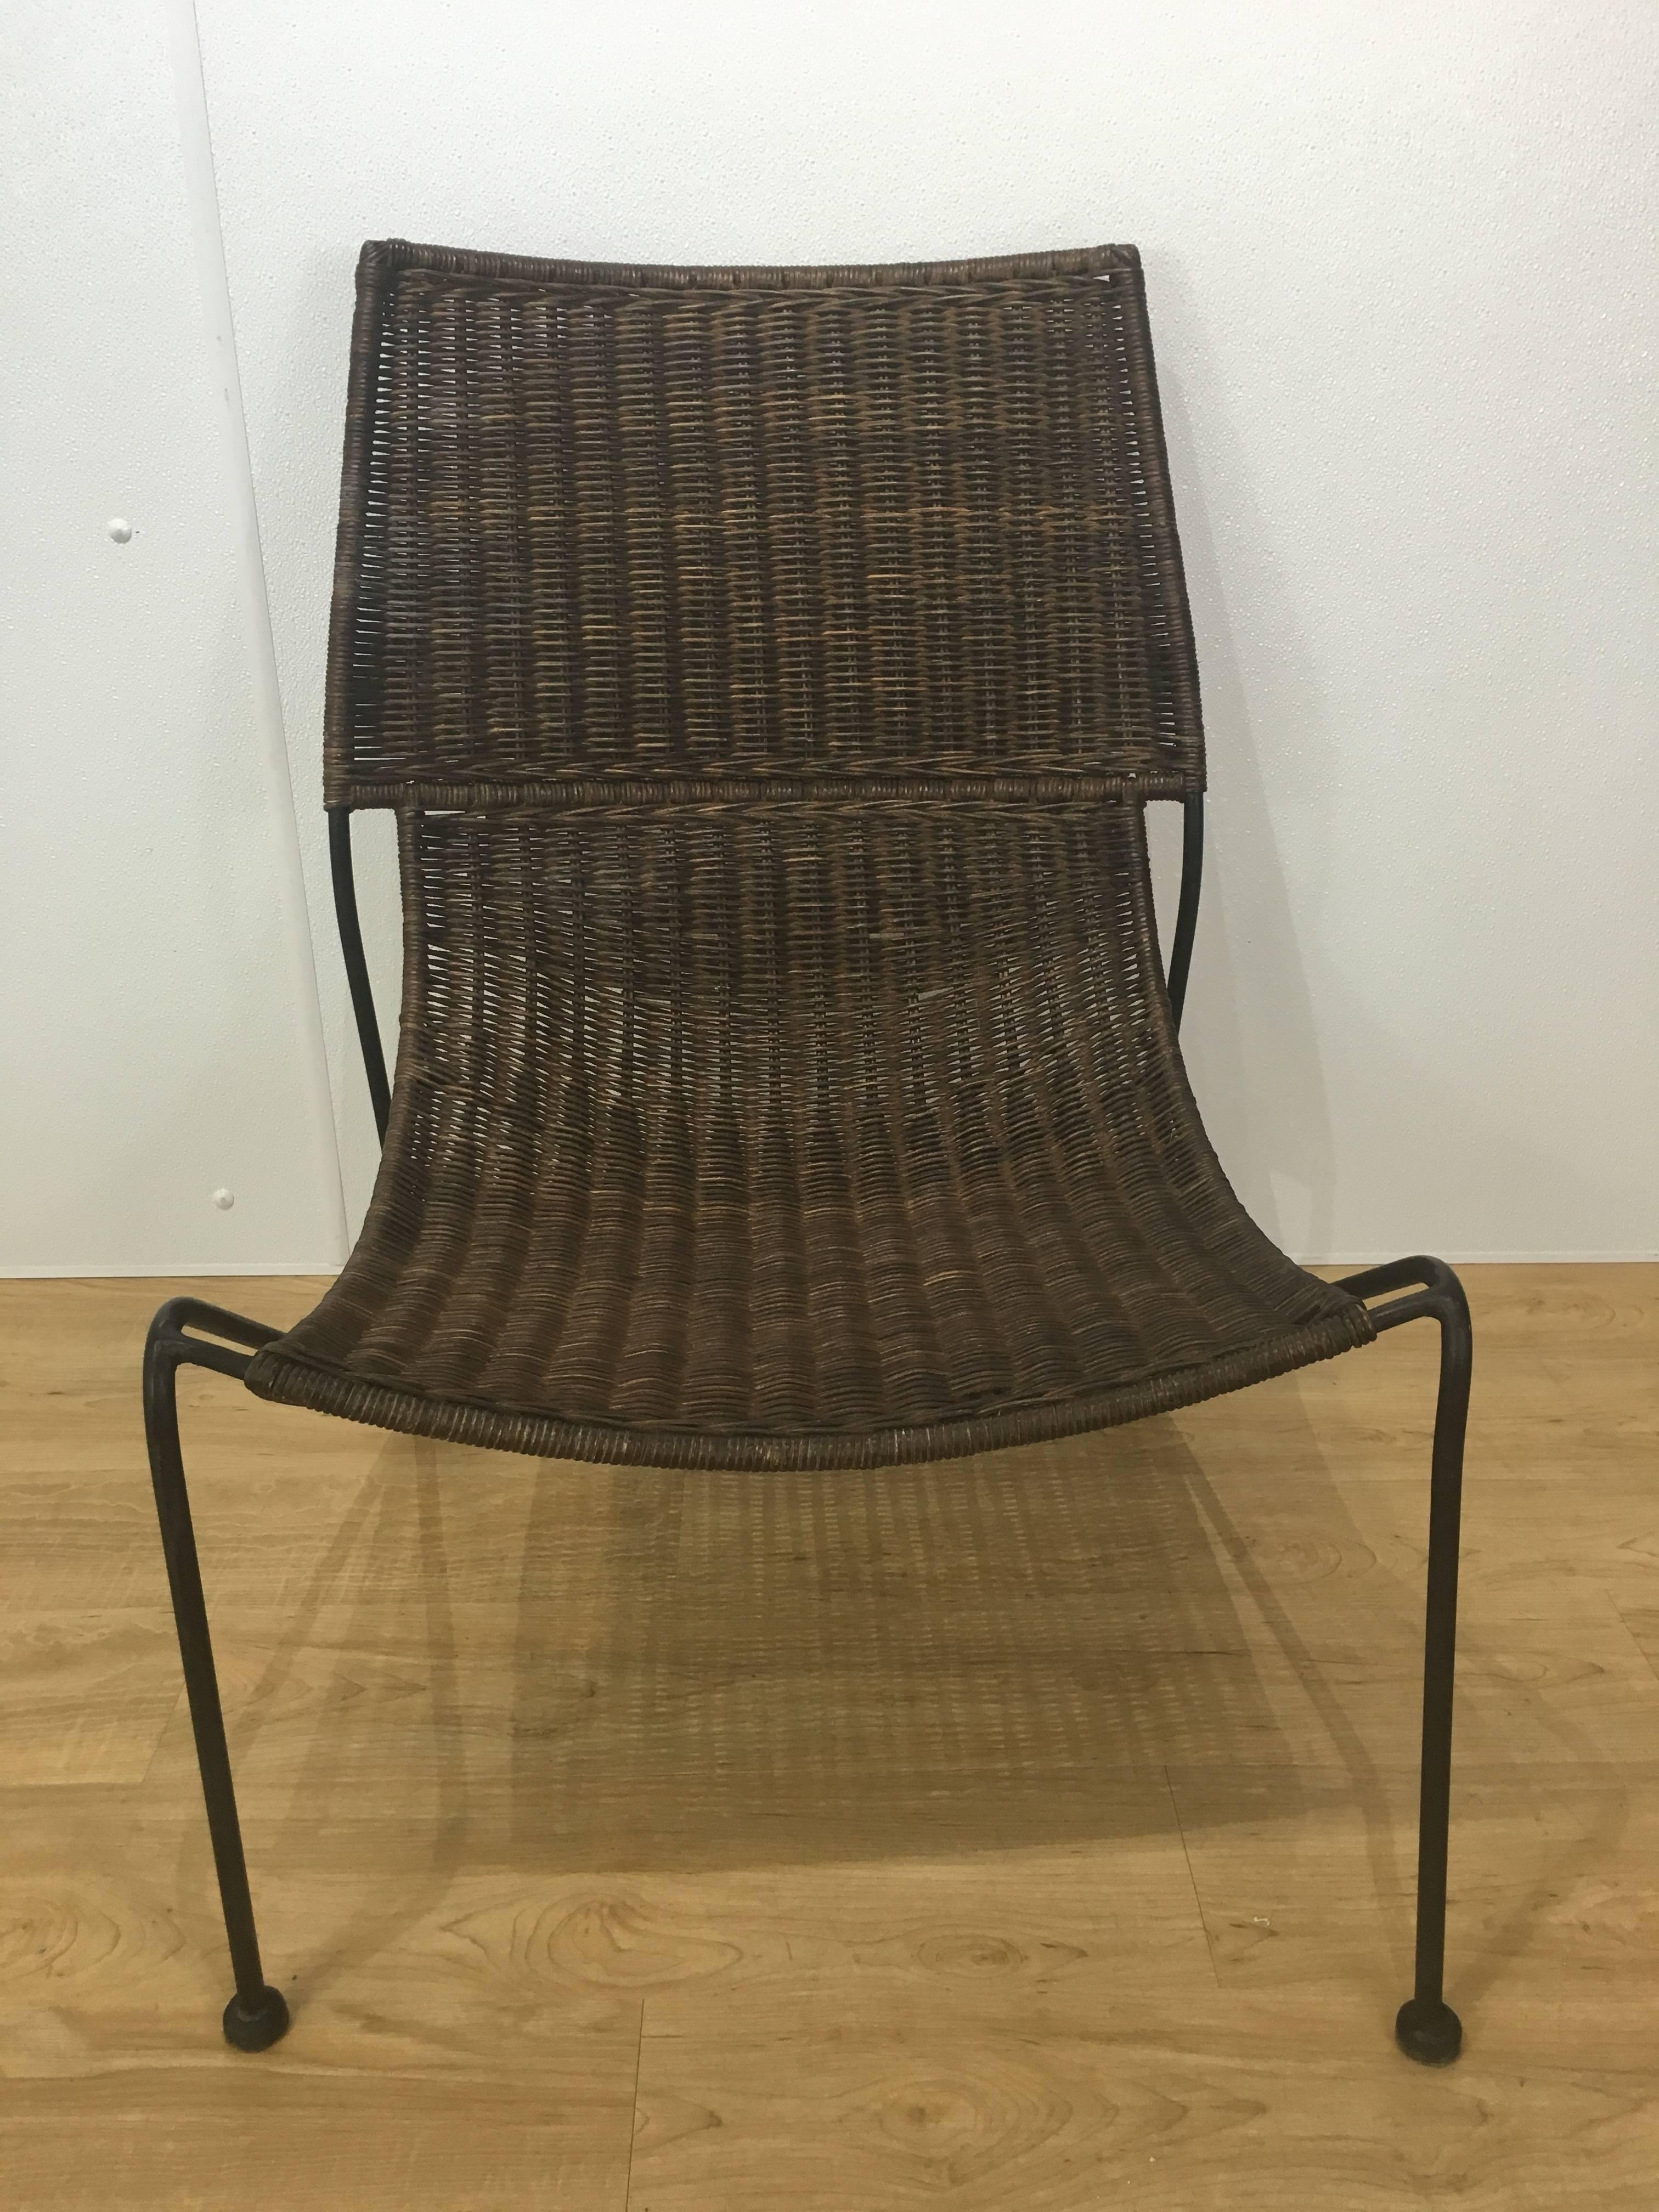 Sculptural rattan lounge chair, finely woven on stylized ebonized iron base.